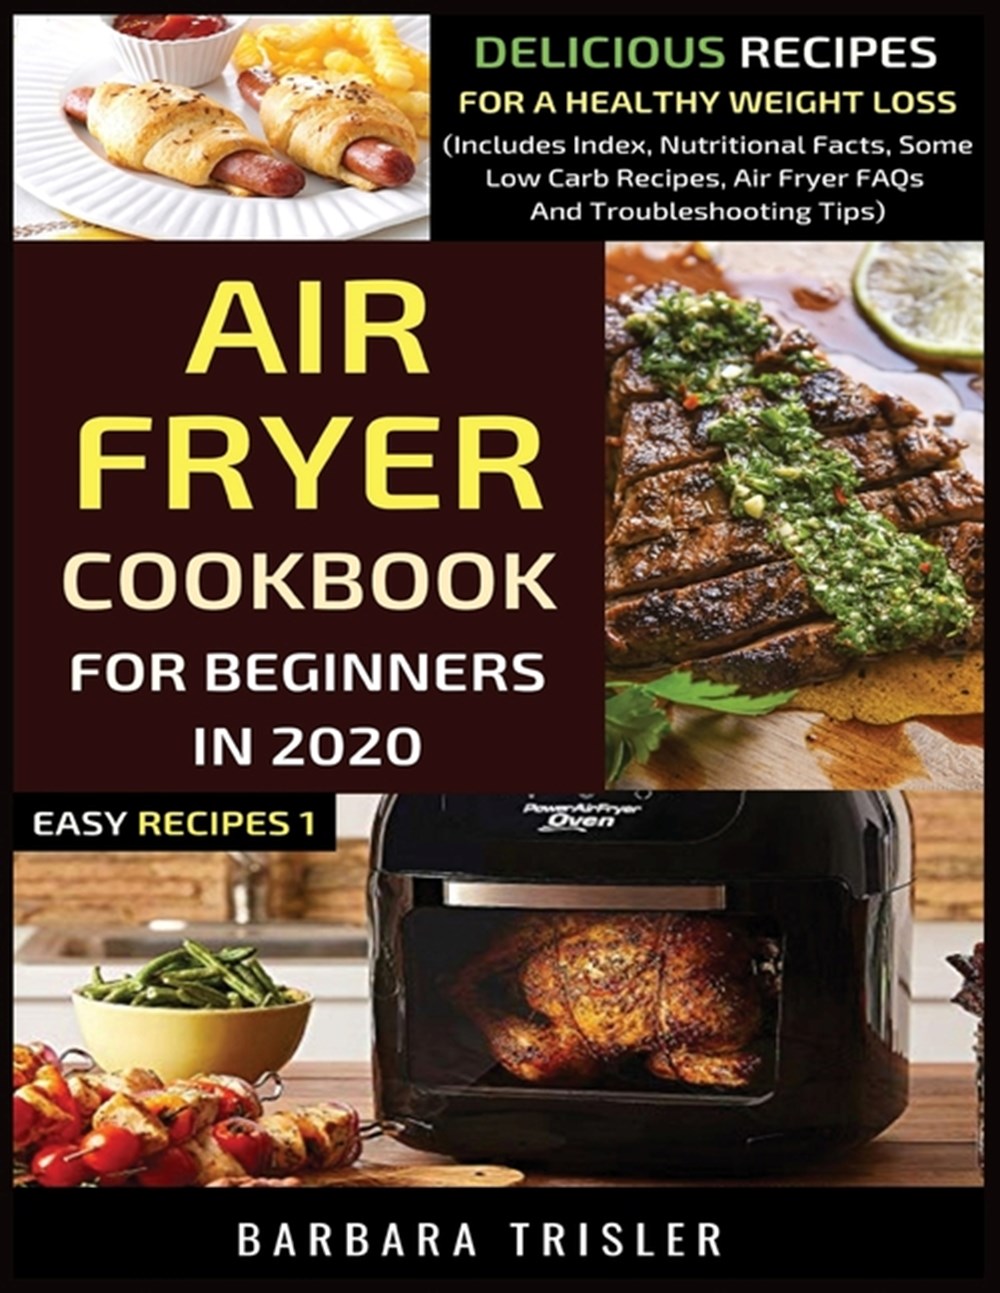 Air Fryer Cookbook For Beginners In 2020: Delicious Recipes For A Healthy Weight Loss (Includes Inde